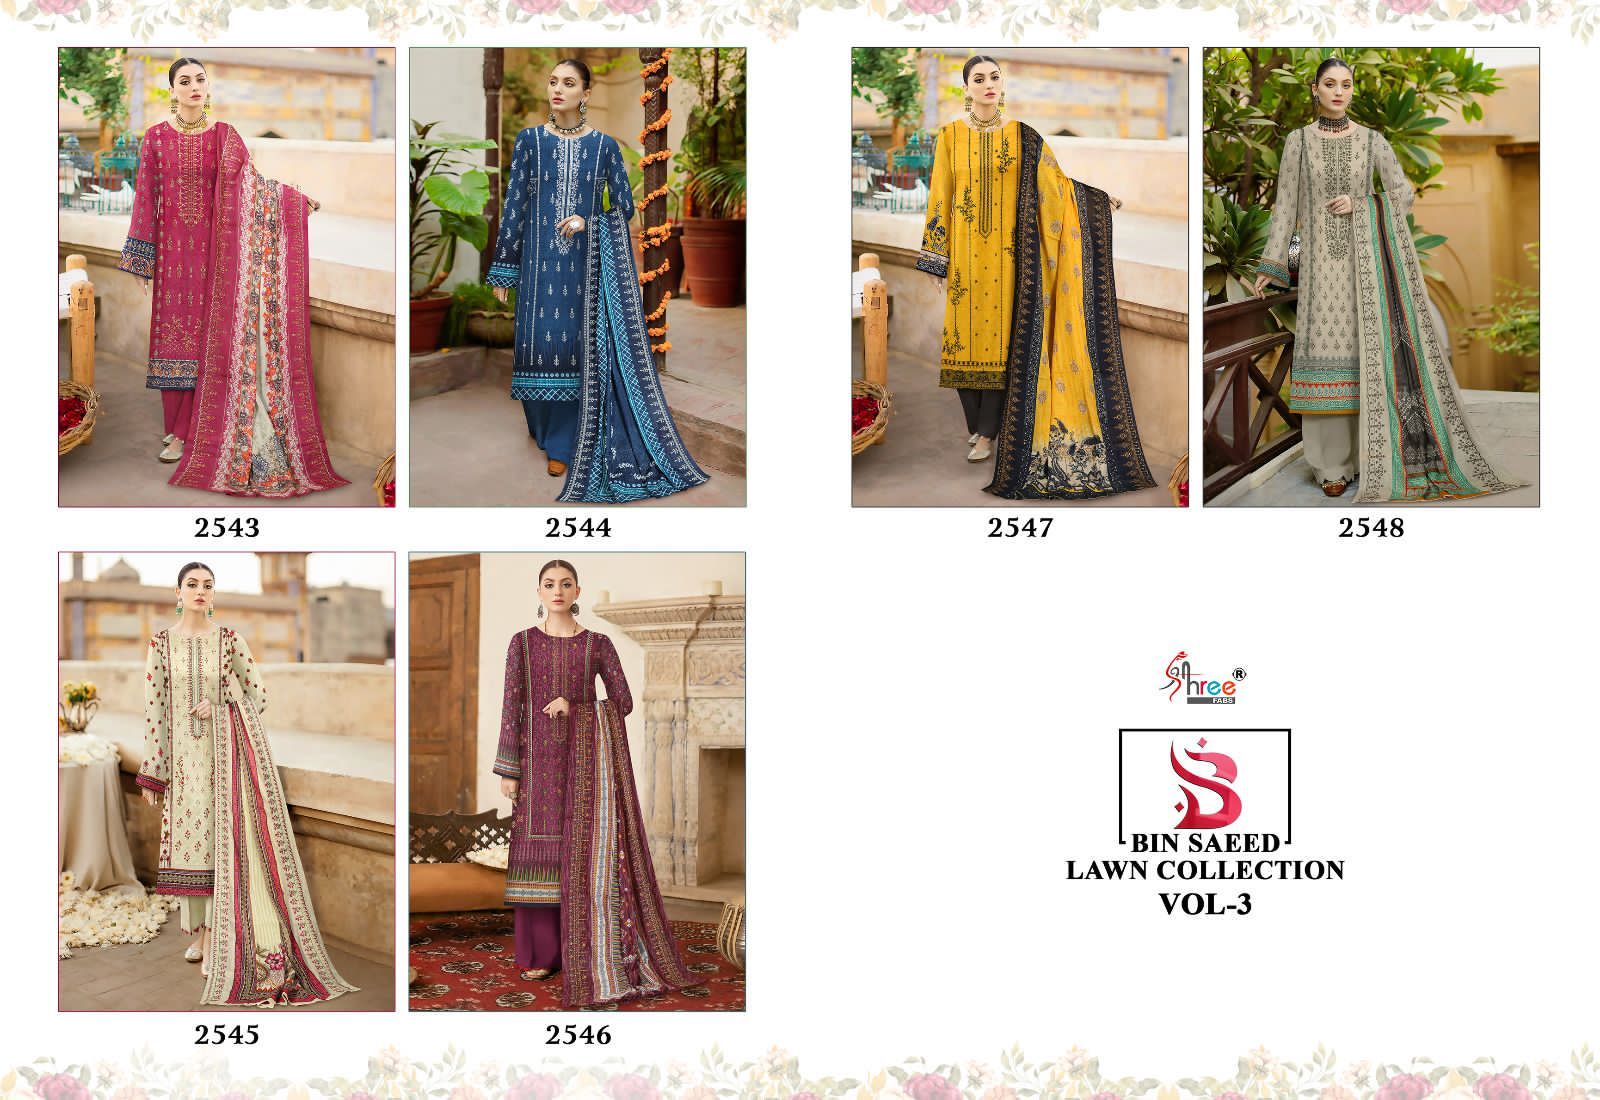 Shree Bin Saeed Lawn Collection Vol 3 collection 3